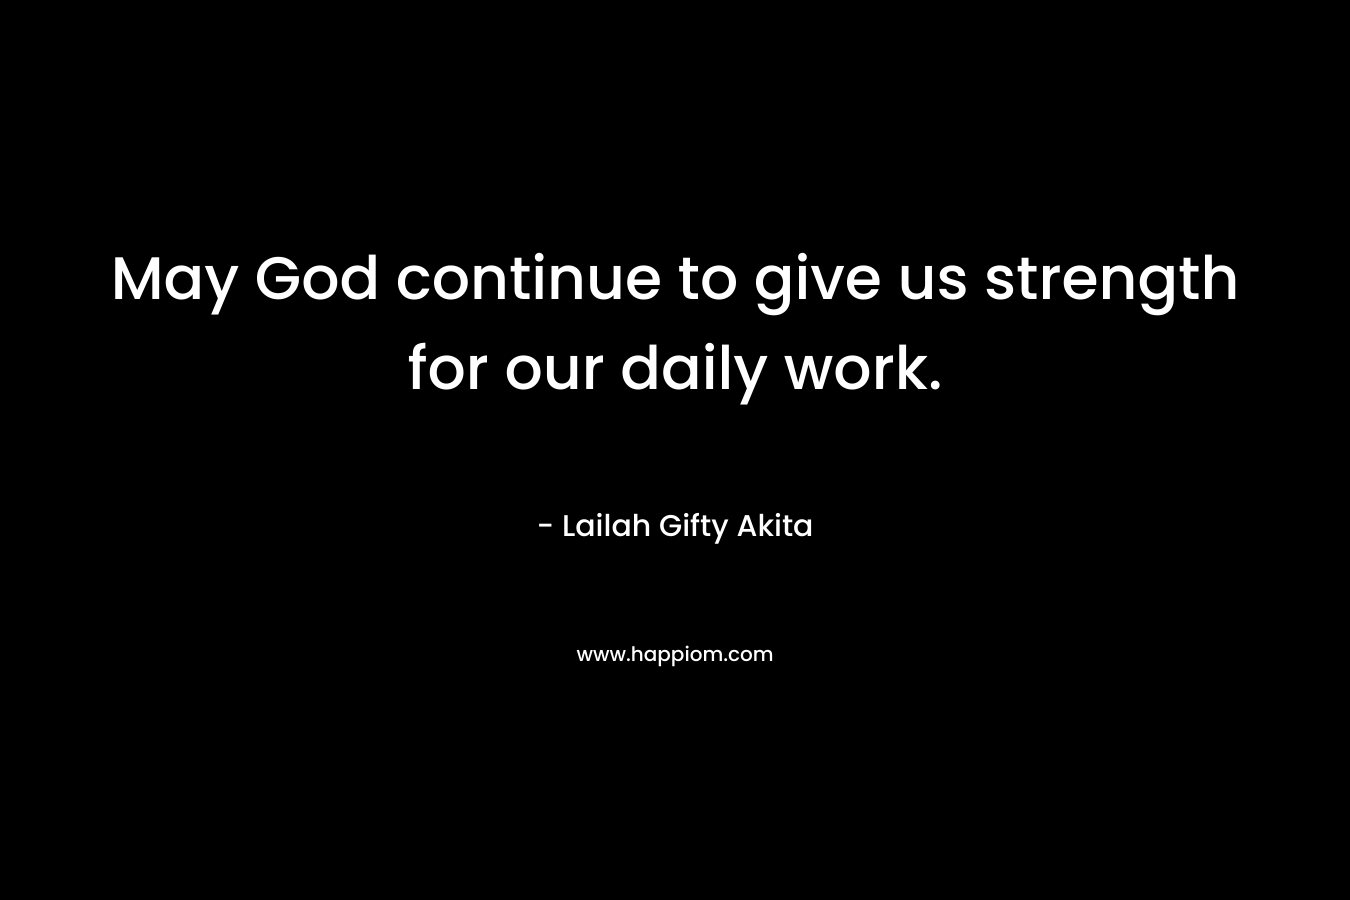 May God continue to give us strength for our daily work.